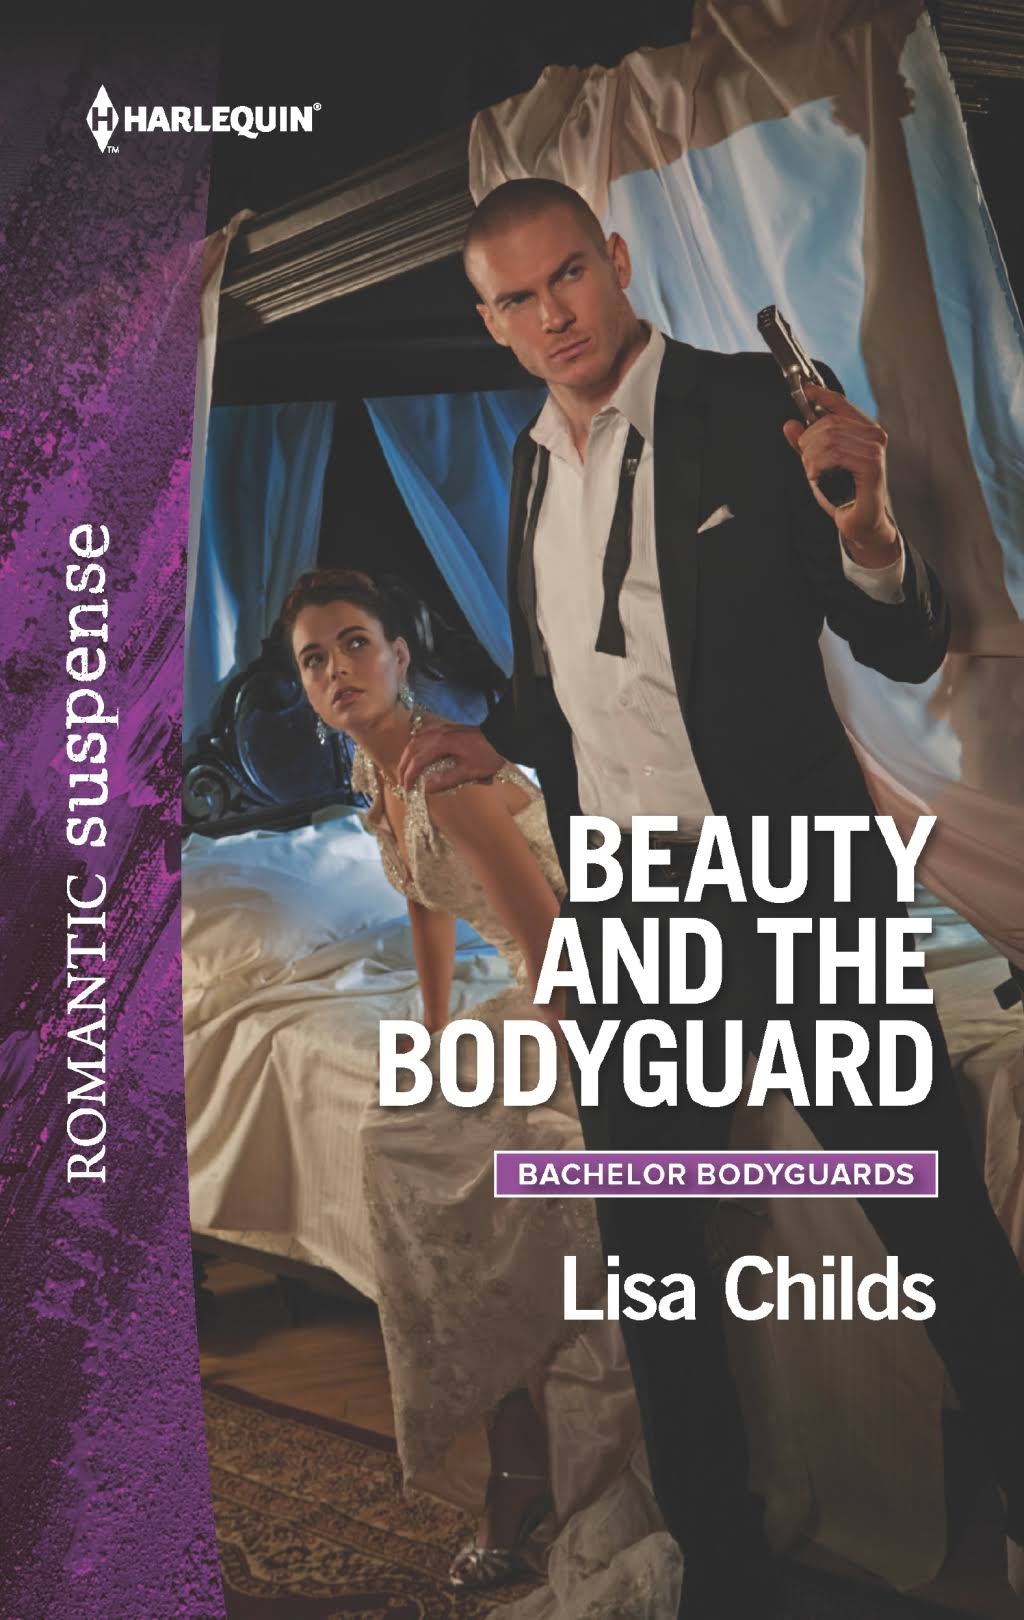 Beauty and the Bodyguard by Lisa Childs